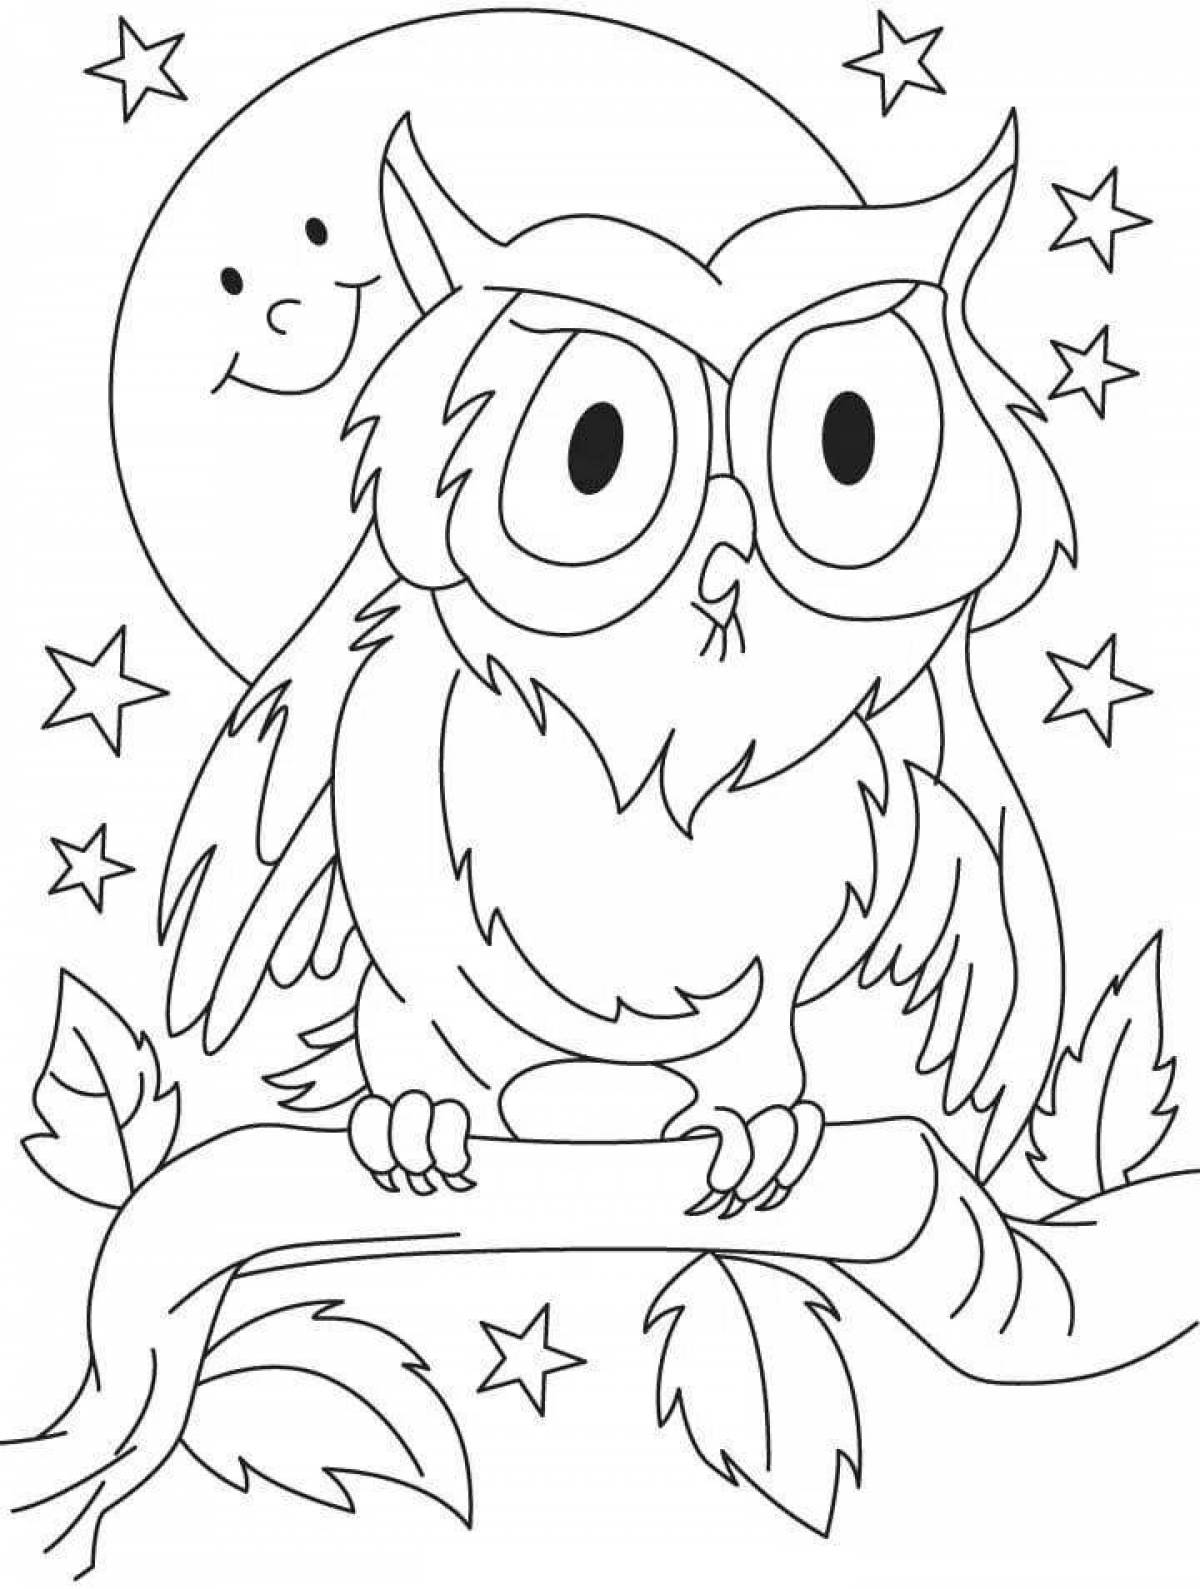 Wonderful owl coloring for kids